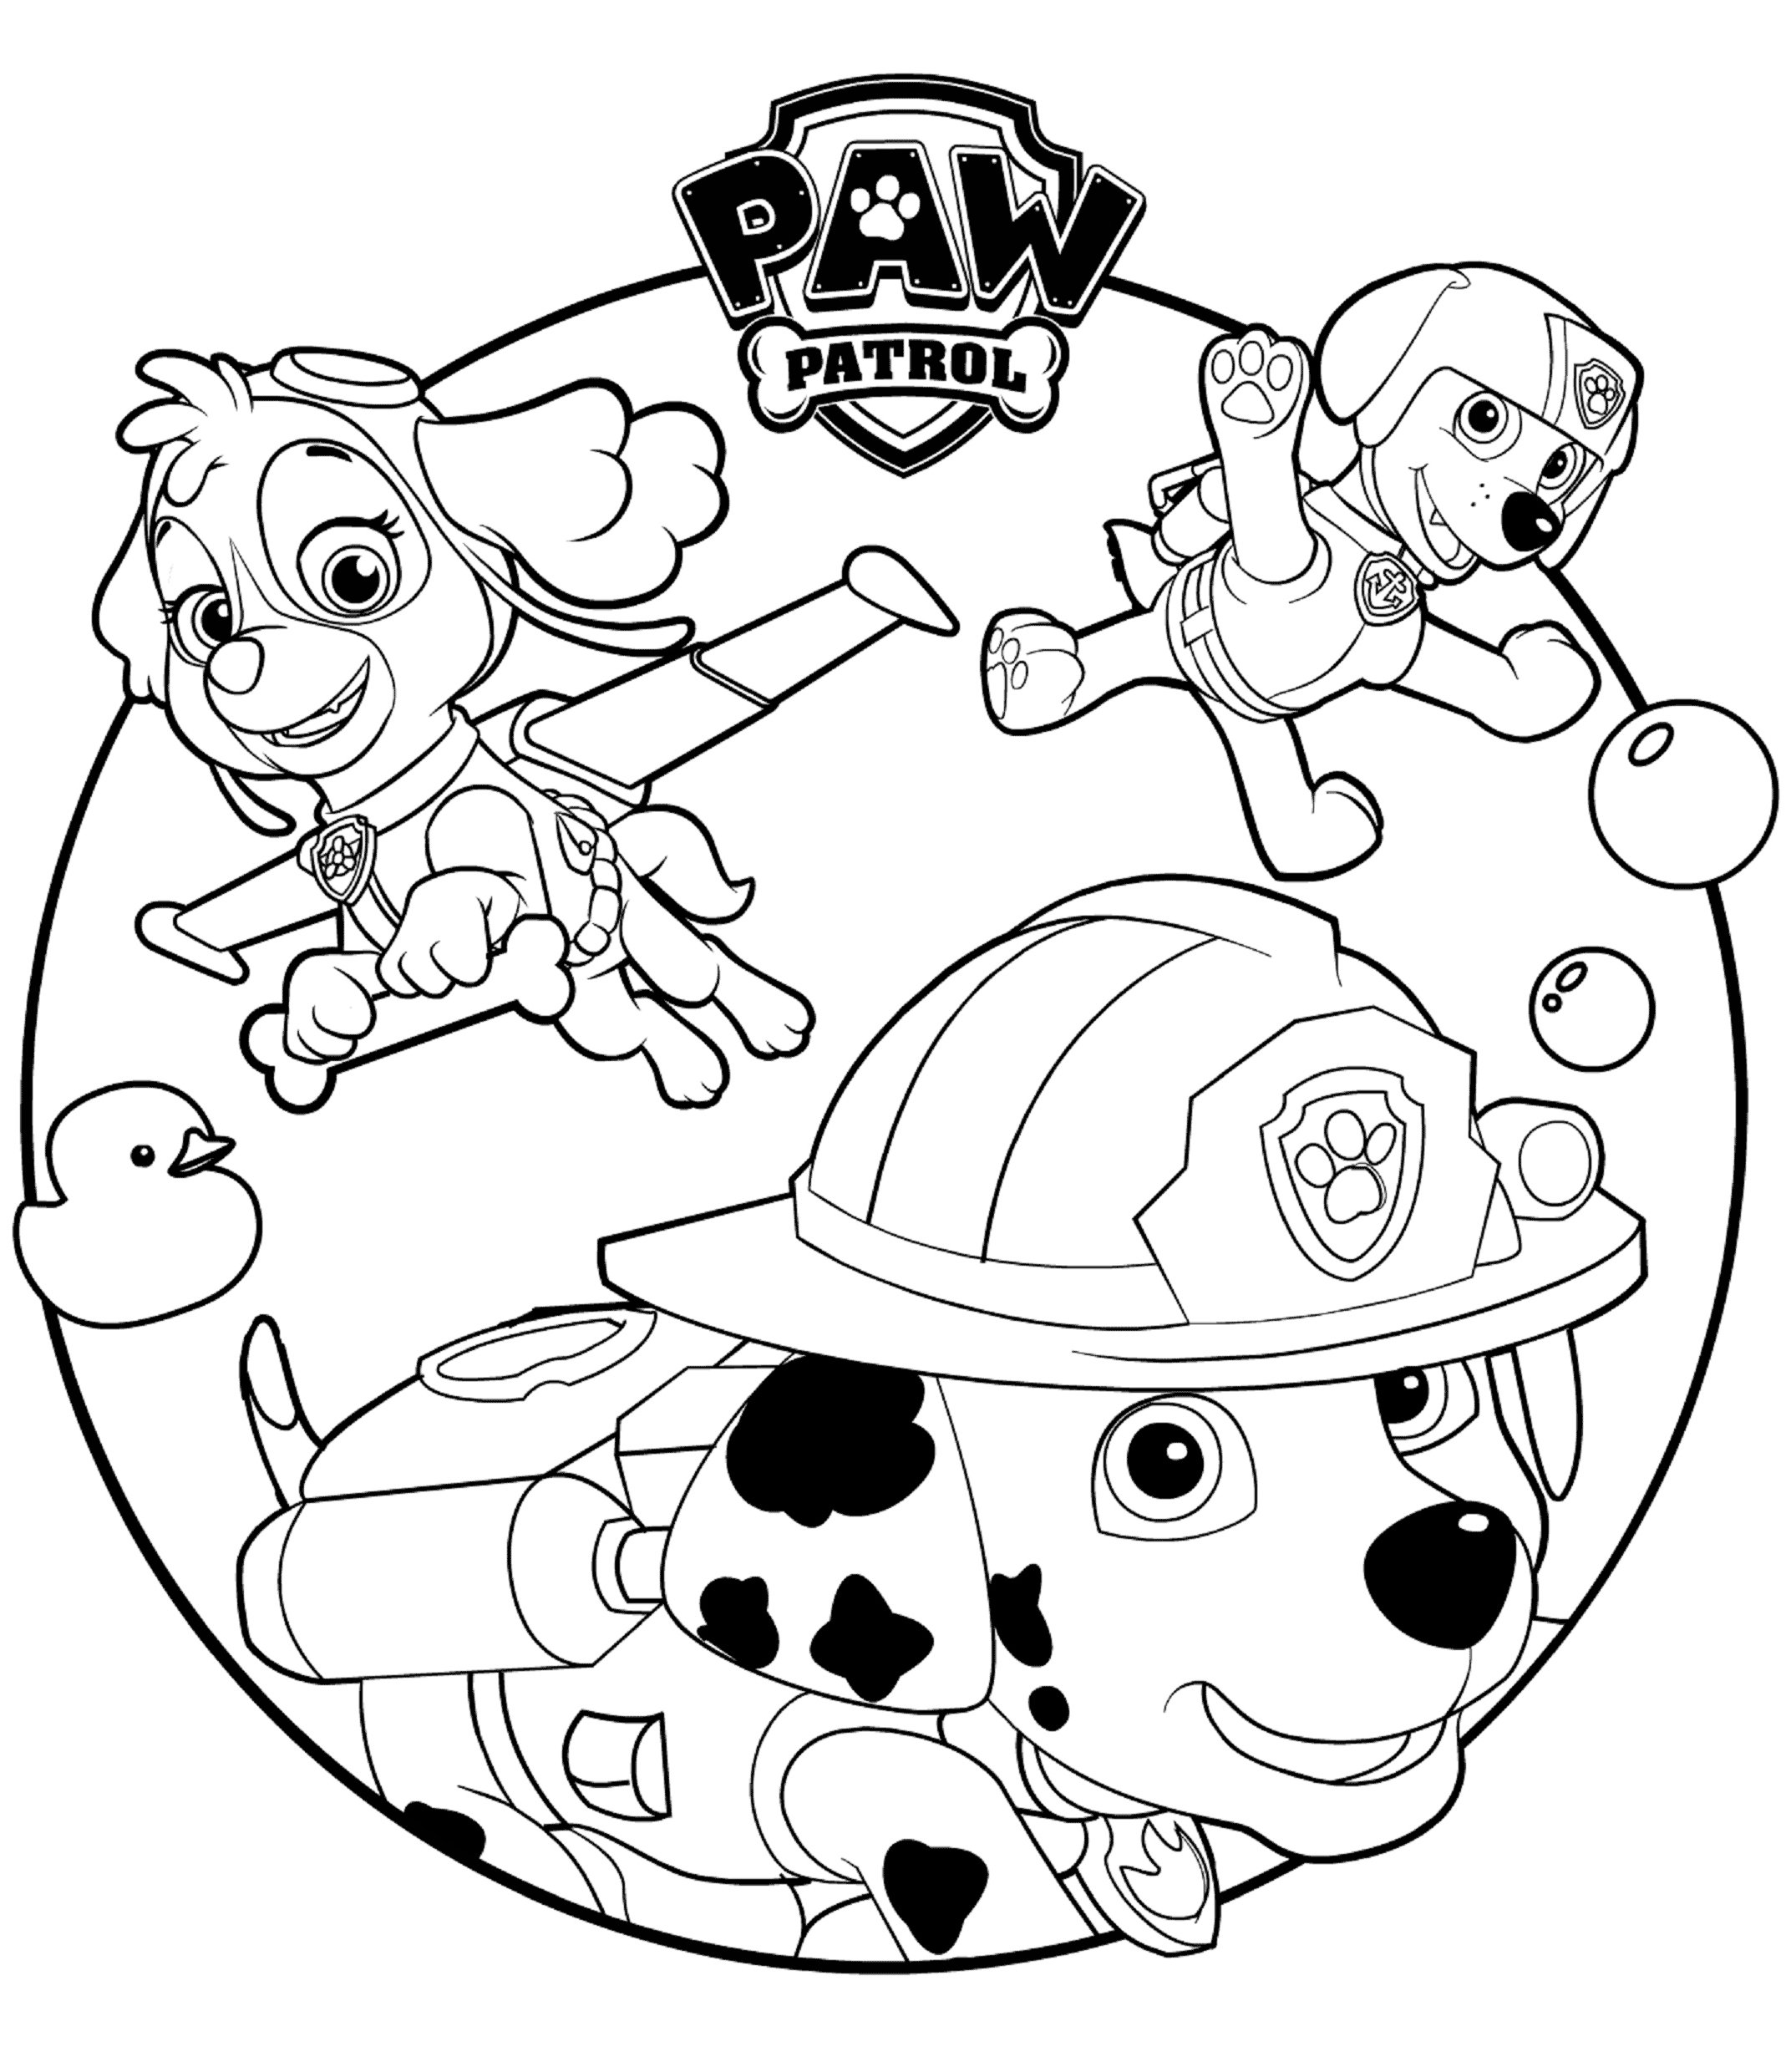 Stella marcus and rocky coloring page paw patrol